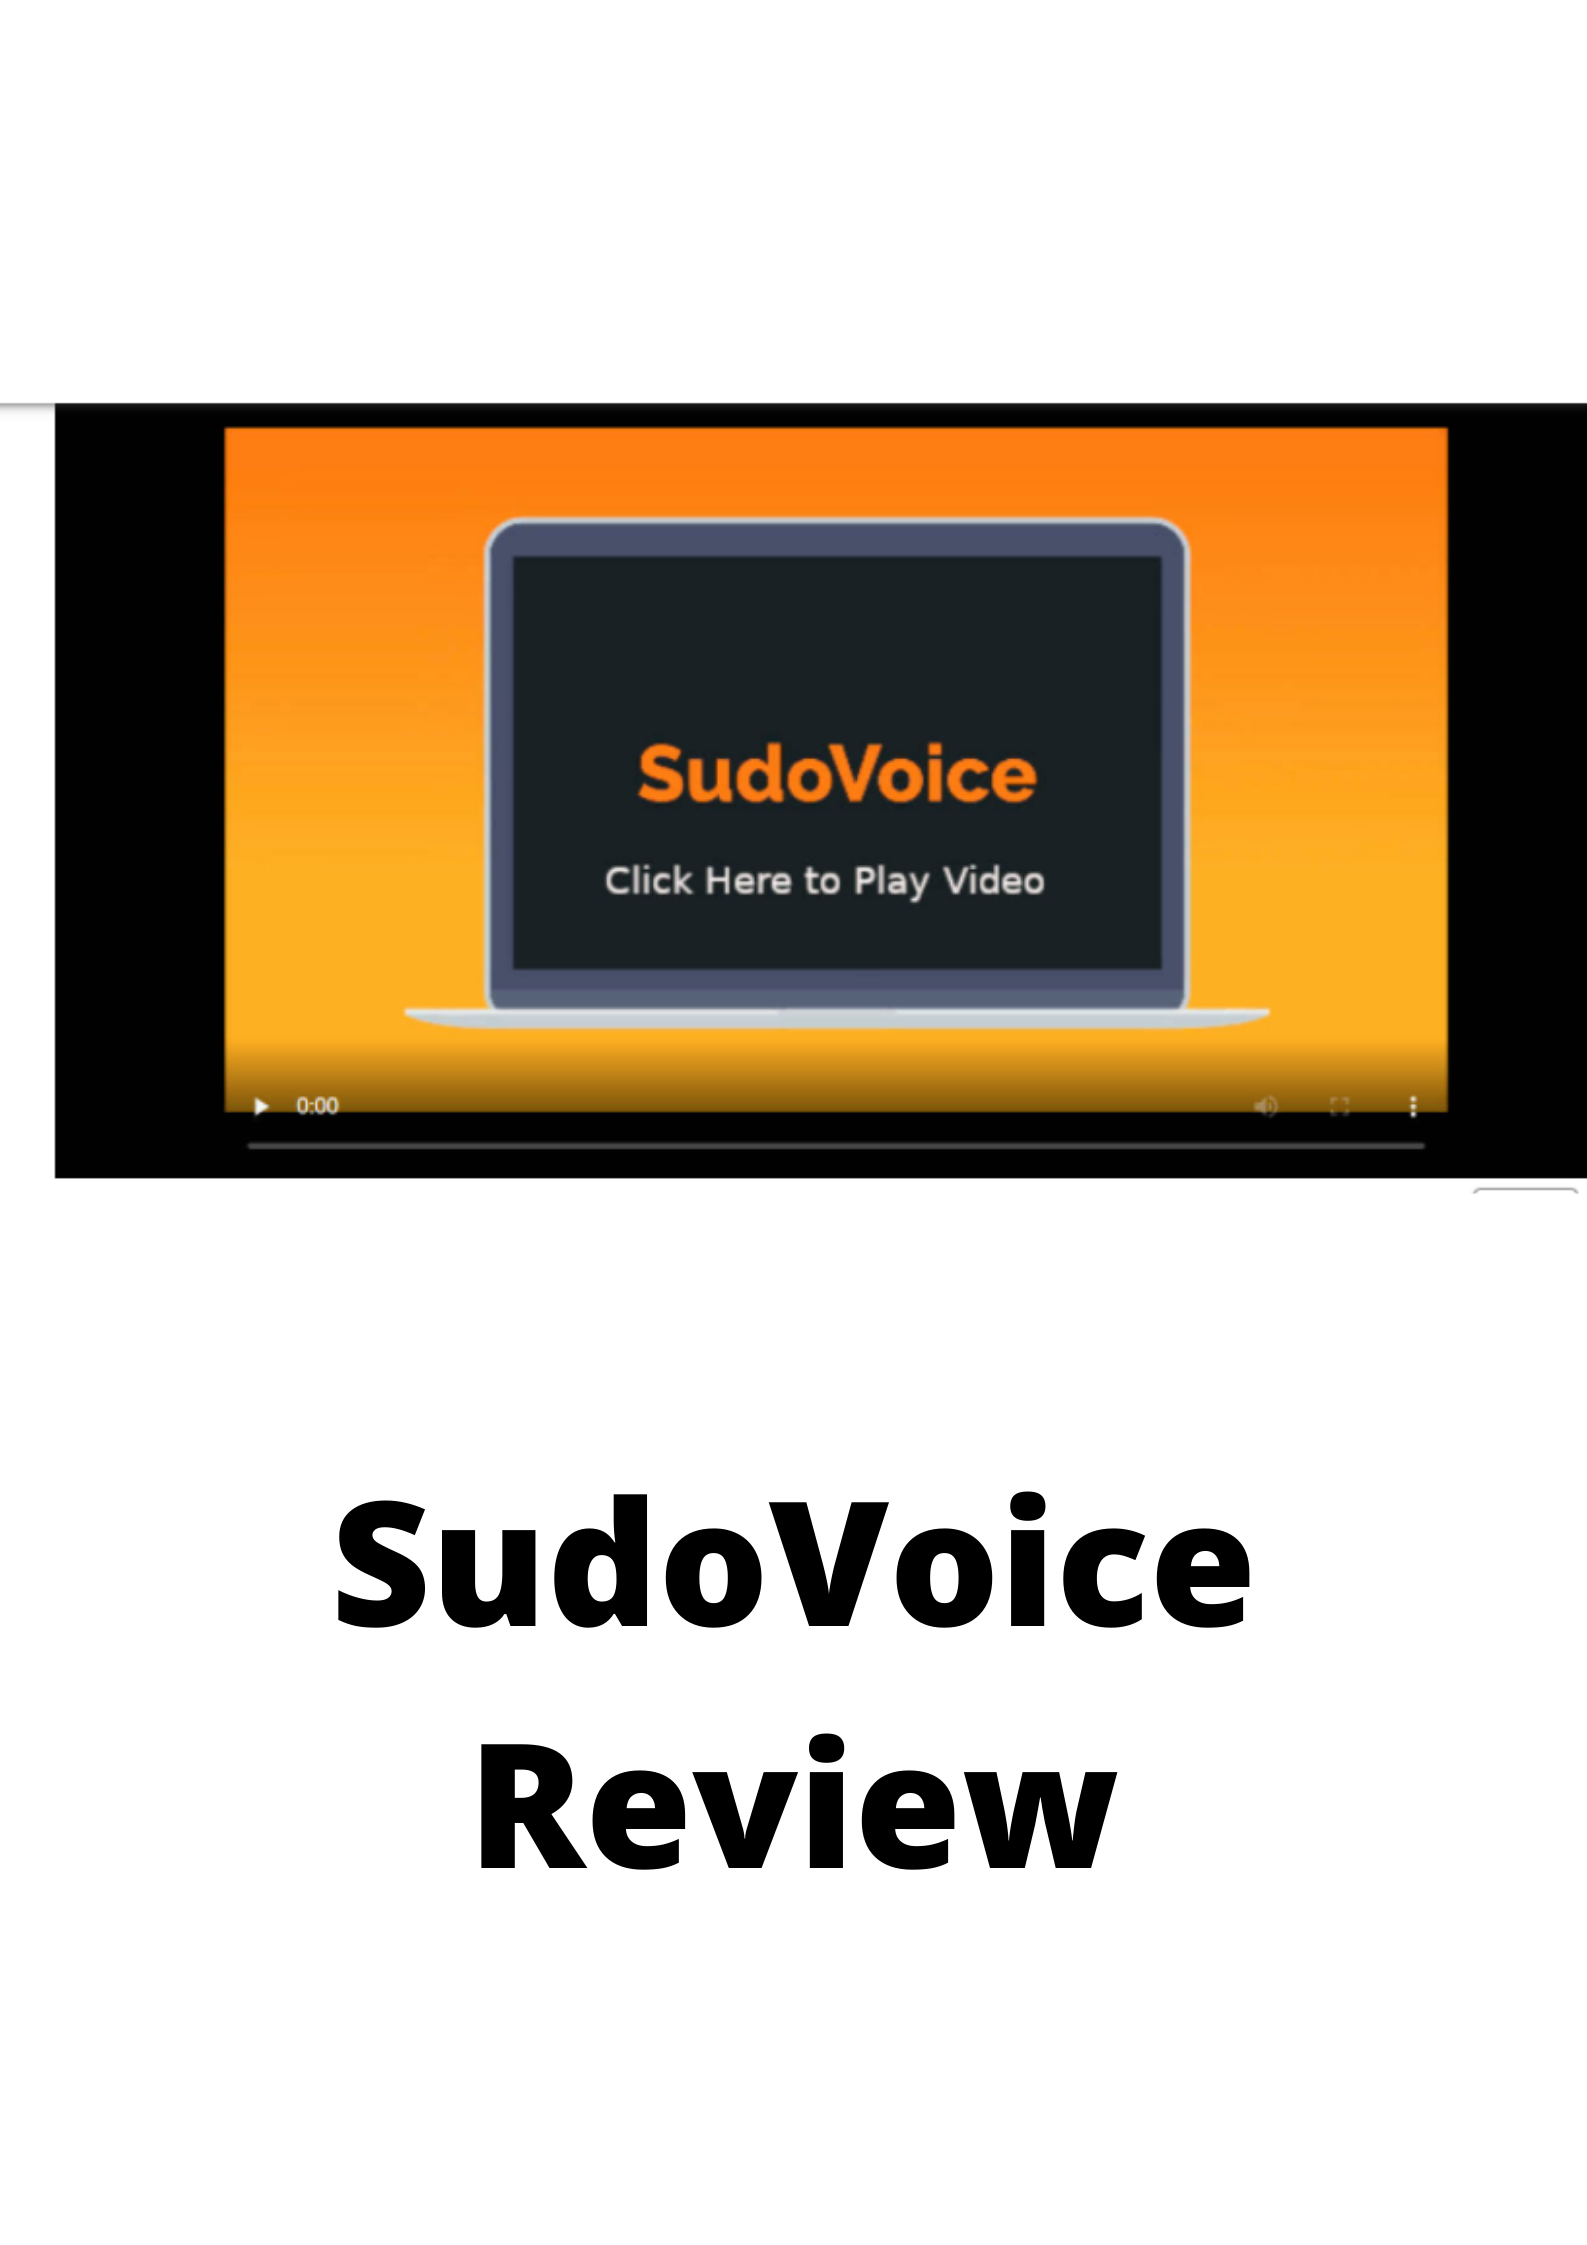 SudoVoice Review